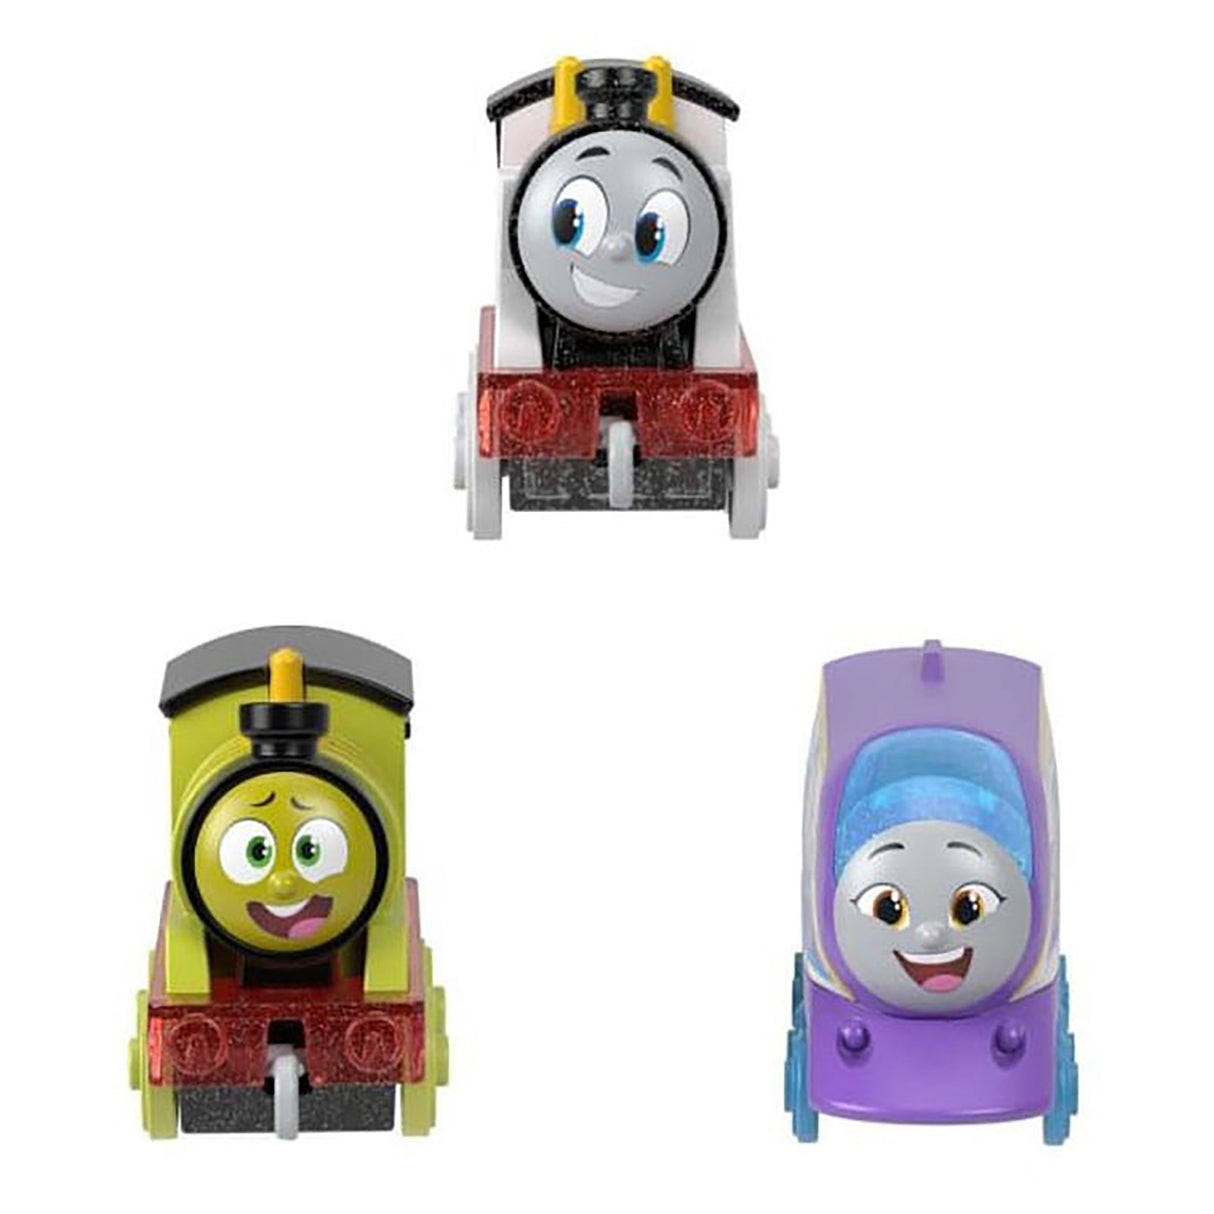 Fisher-Price Thomas & Friends colours Changers Thomas, Percy, and Kana